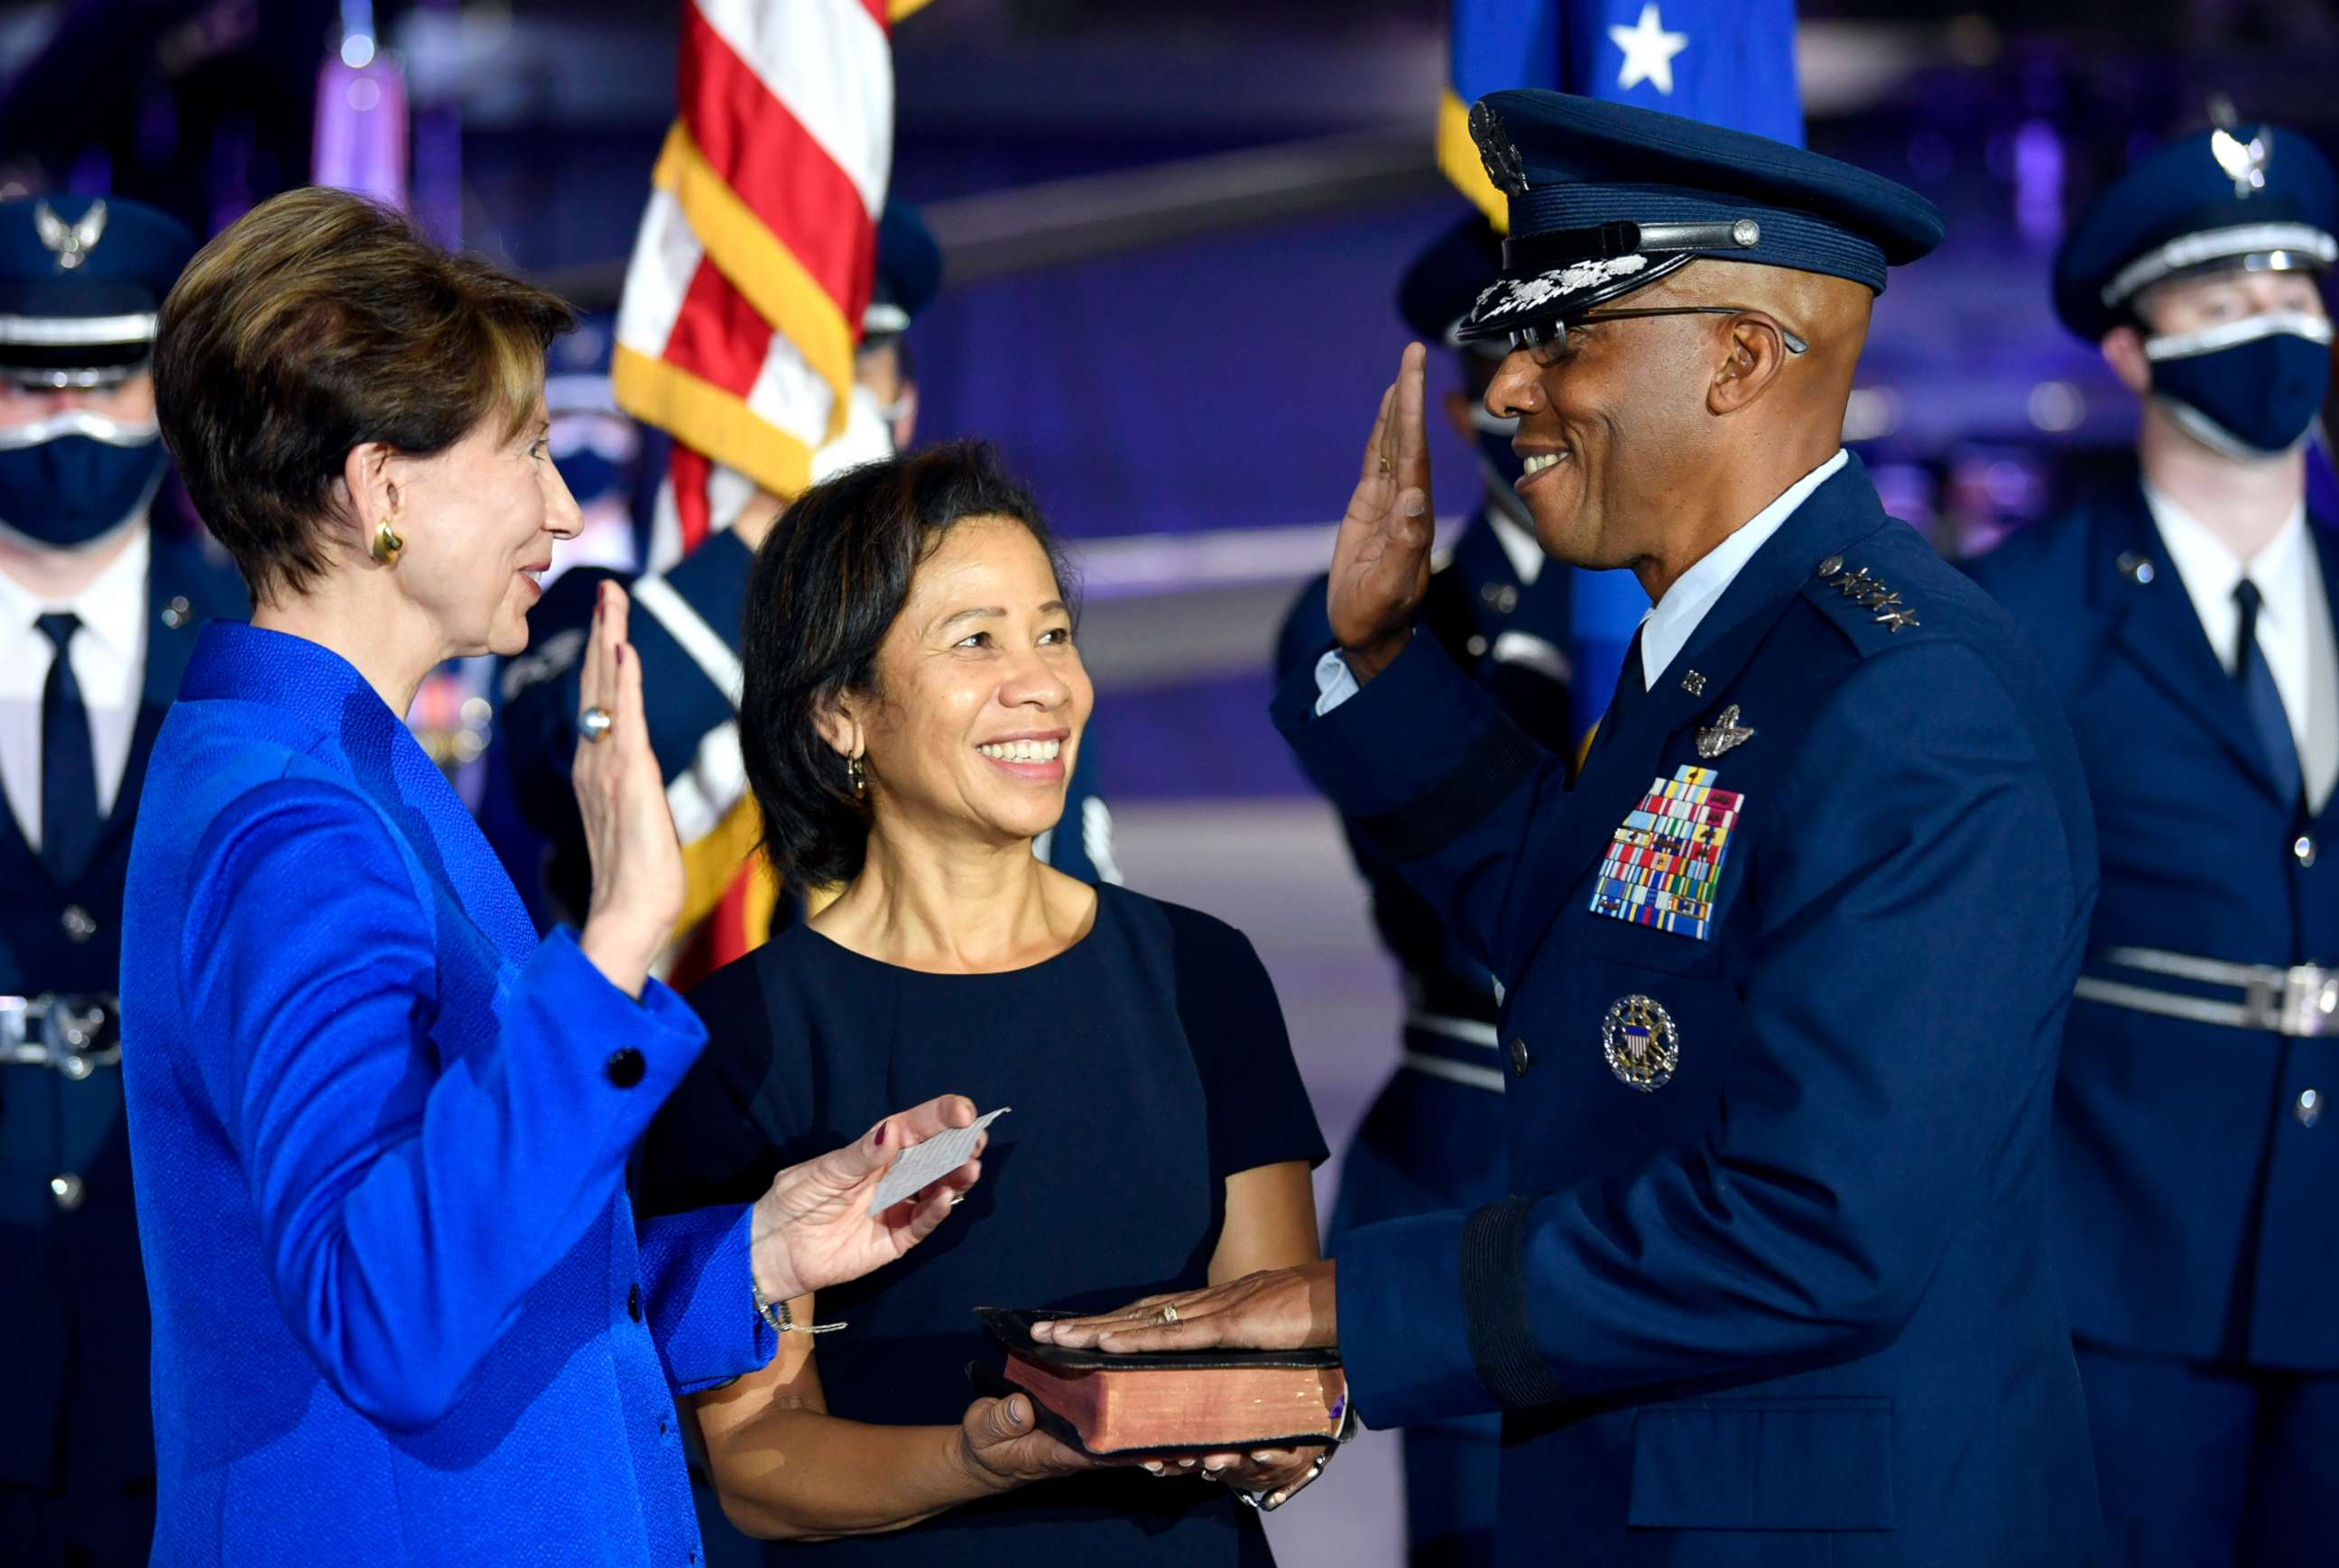 PHOTO: Secretary of the Air Force Barbara M. Barrett administers the oath of office to incoming Air Force Chief of Staff Gen. Charles Q. Brown Jr.during the CSAF Transfer of Responsibility ceremony at Joint Base Andrews, Md., Aug. 6, 2020. 